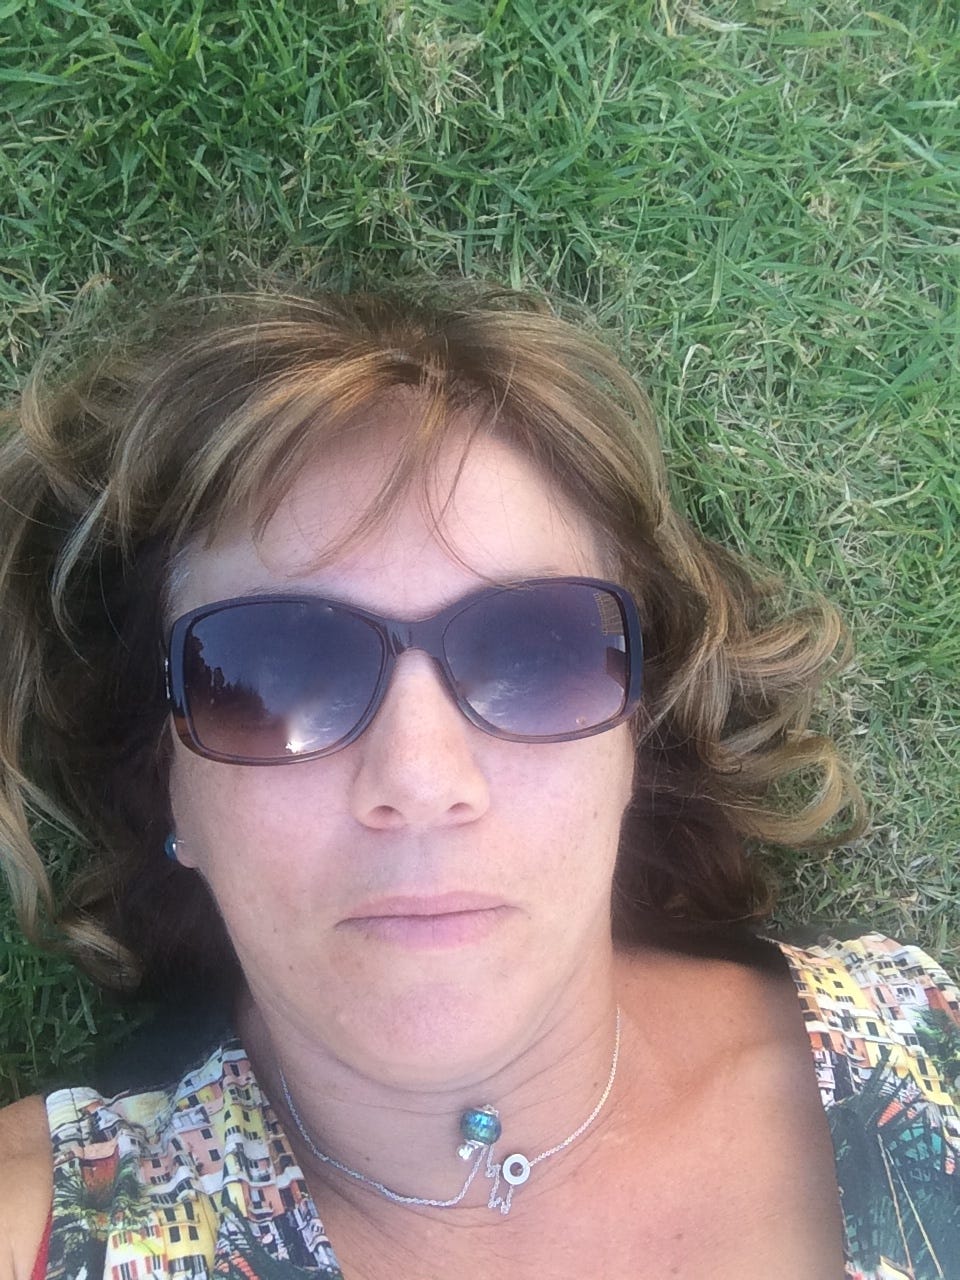 The author wearing sunglasses, lying not the grass waiting for ideas